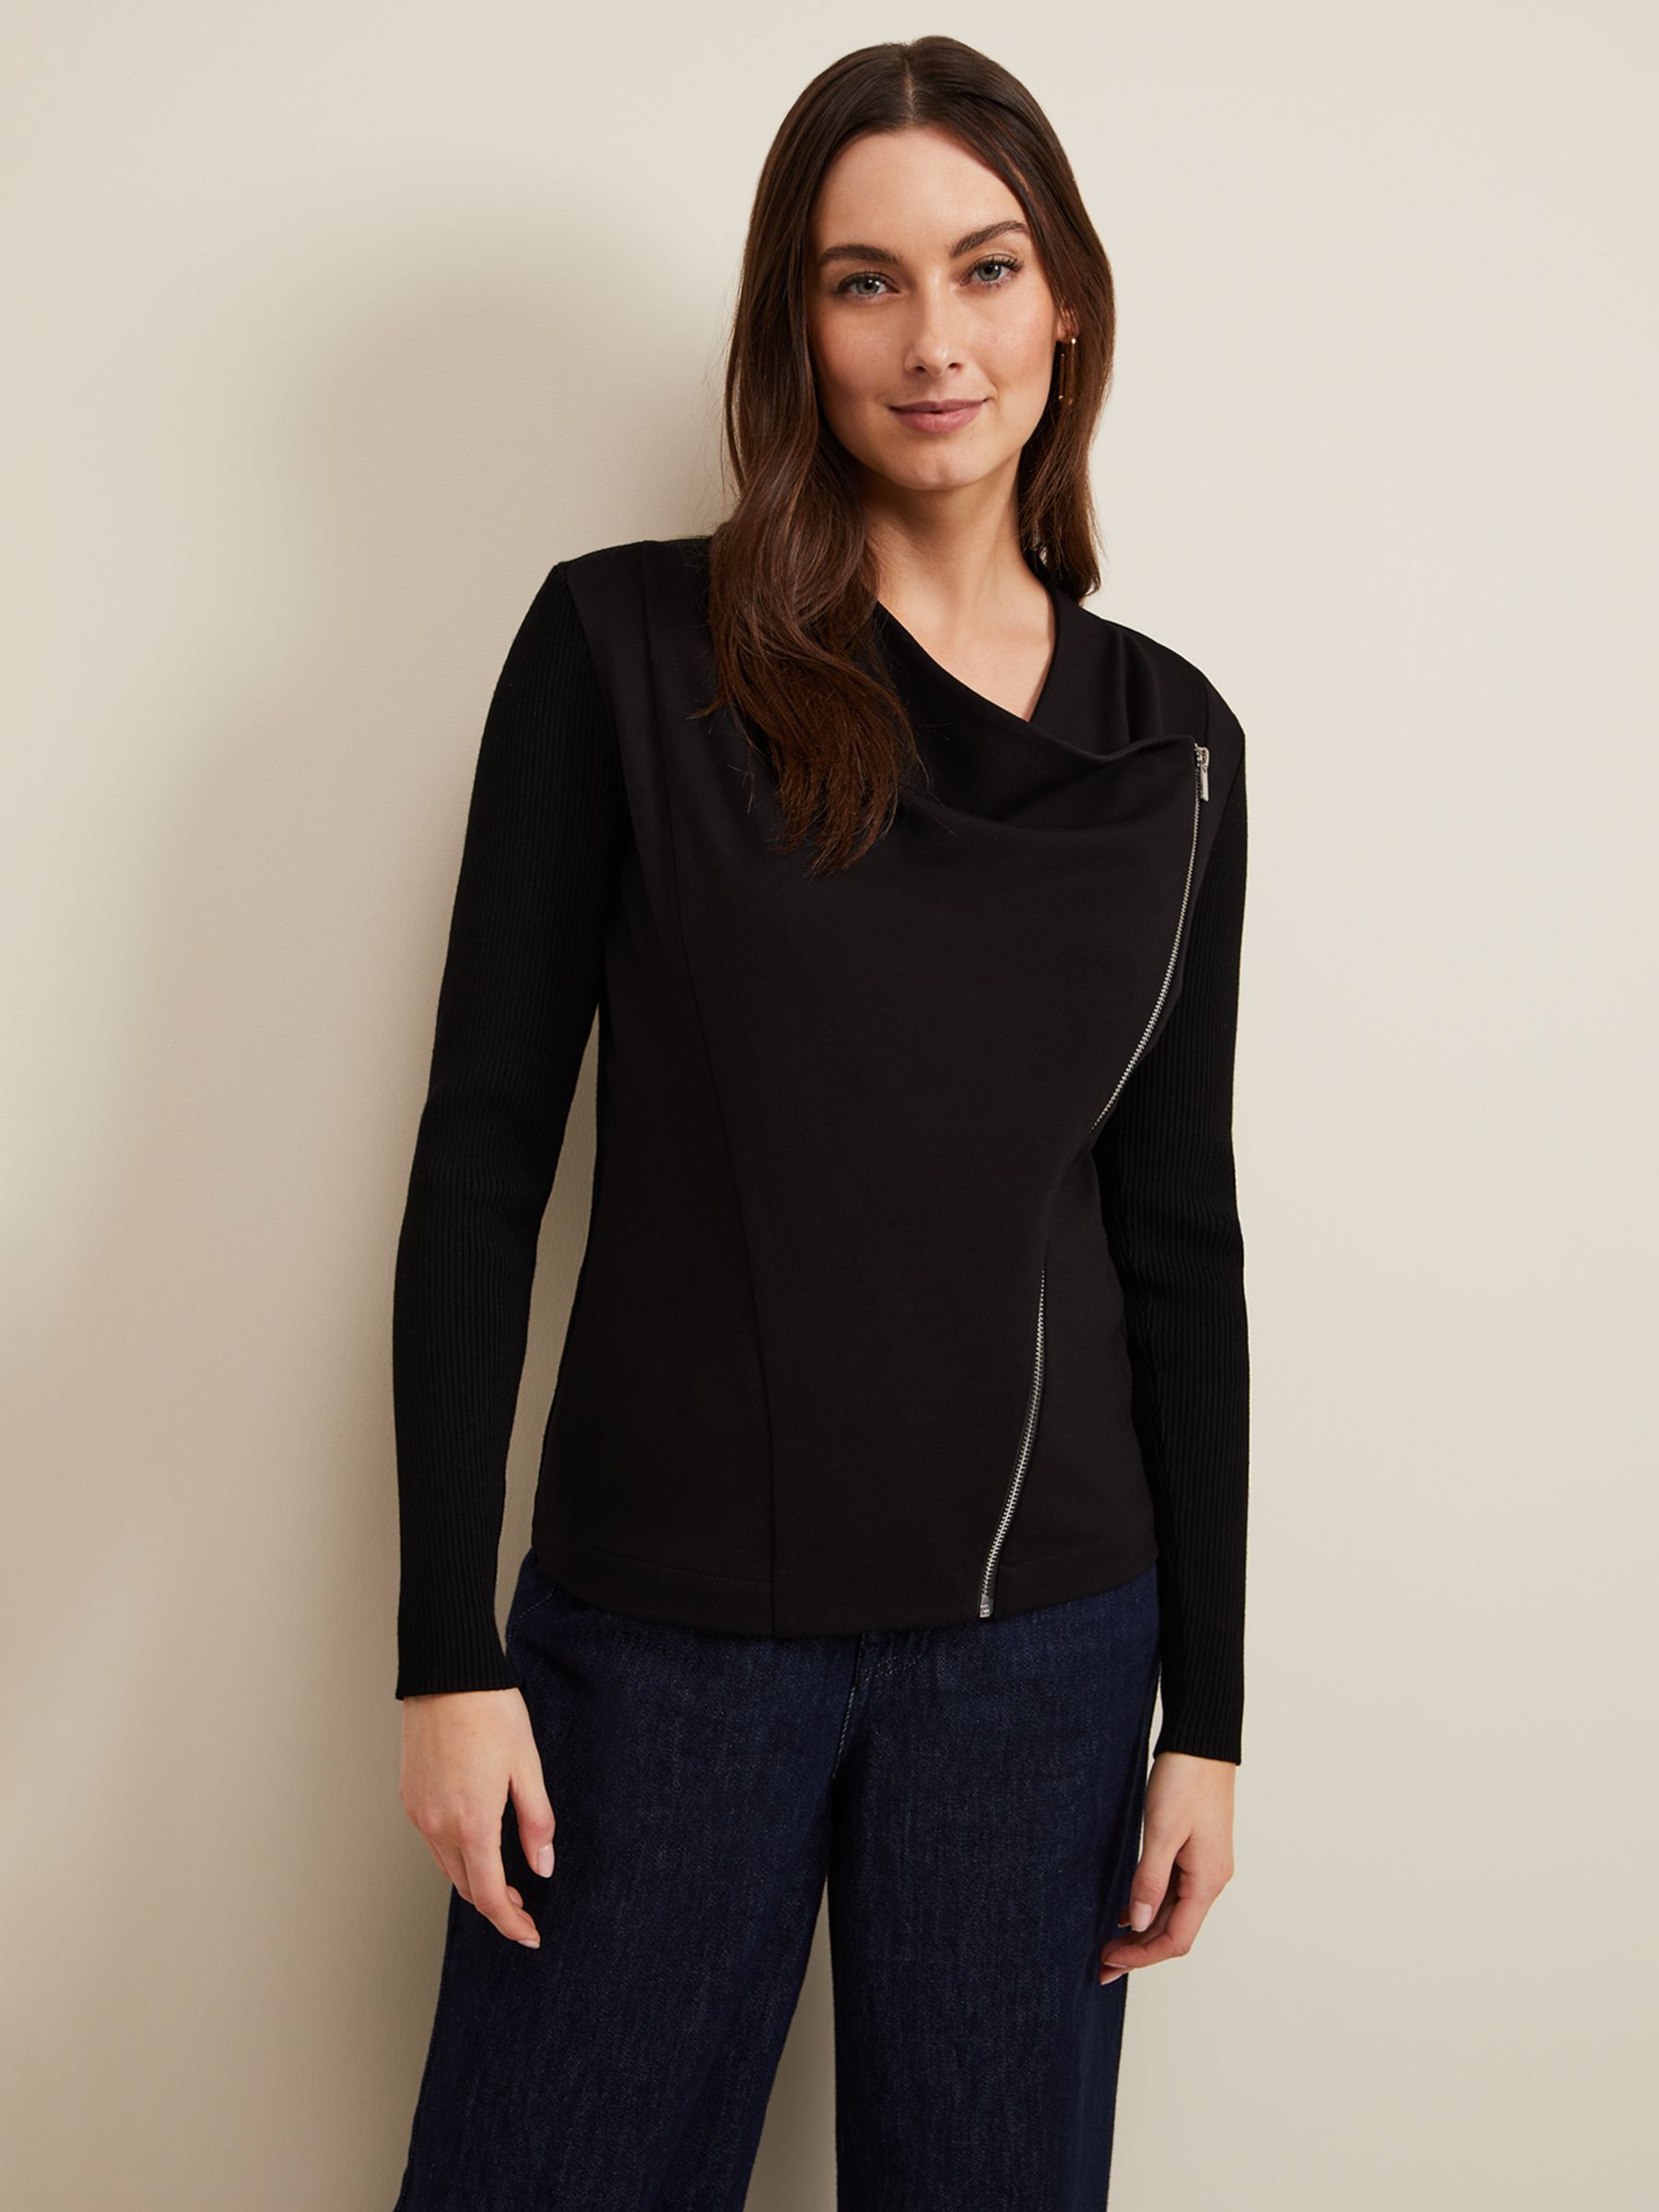 Buy Phase Eight Frankie Knitted Jacket, Black Online at johnlewis.com